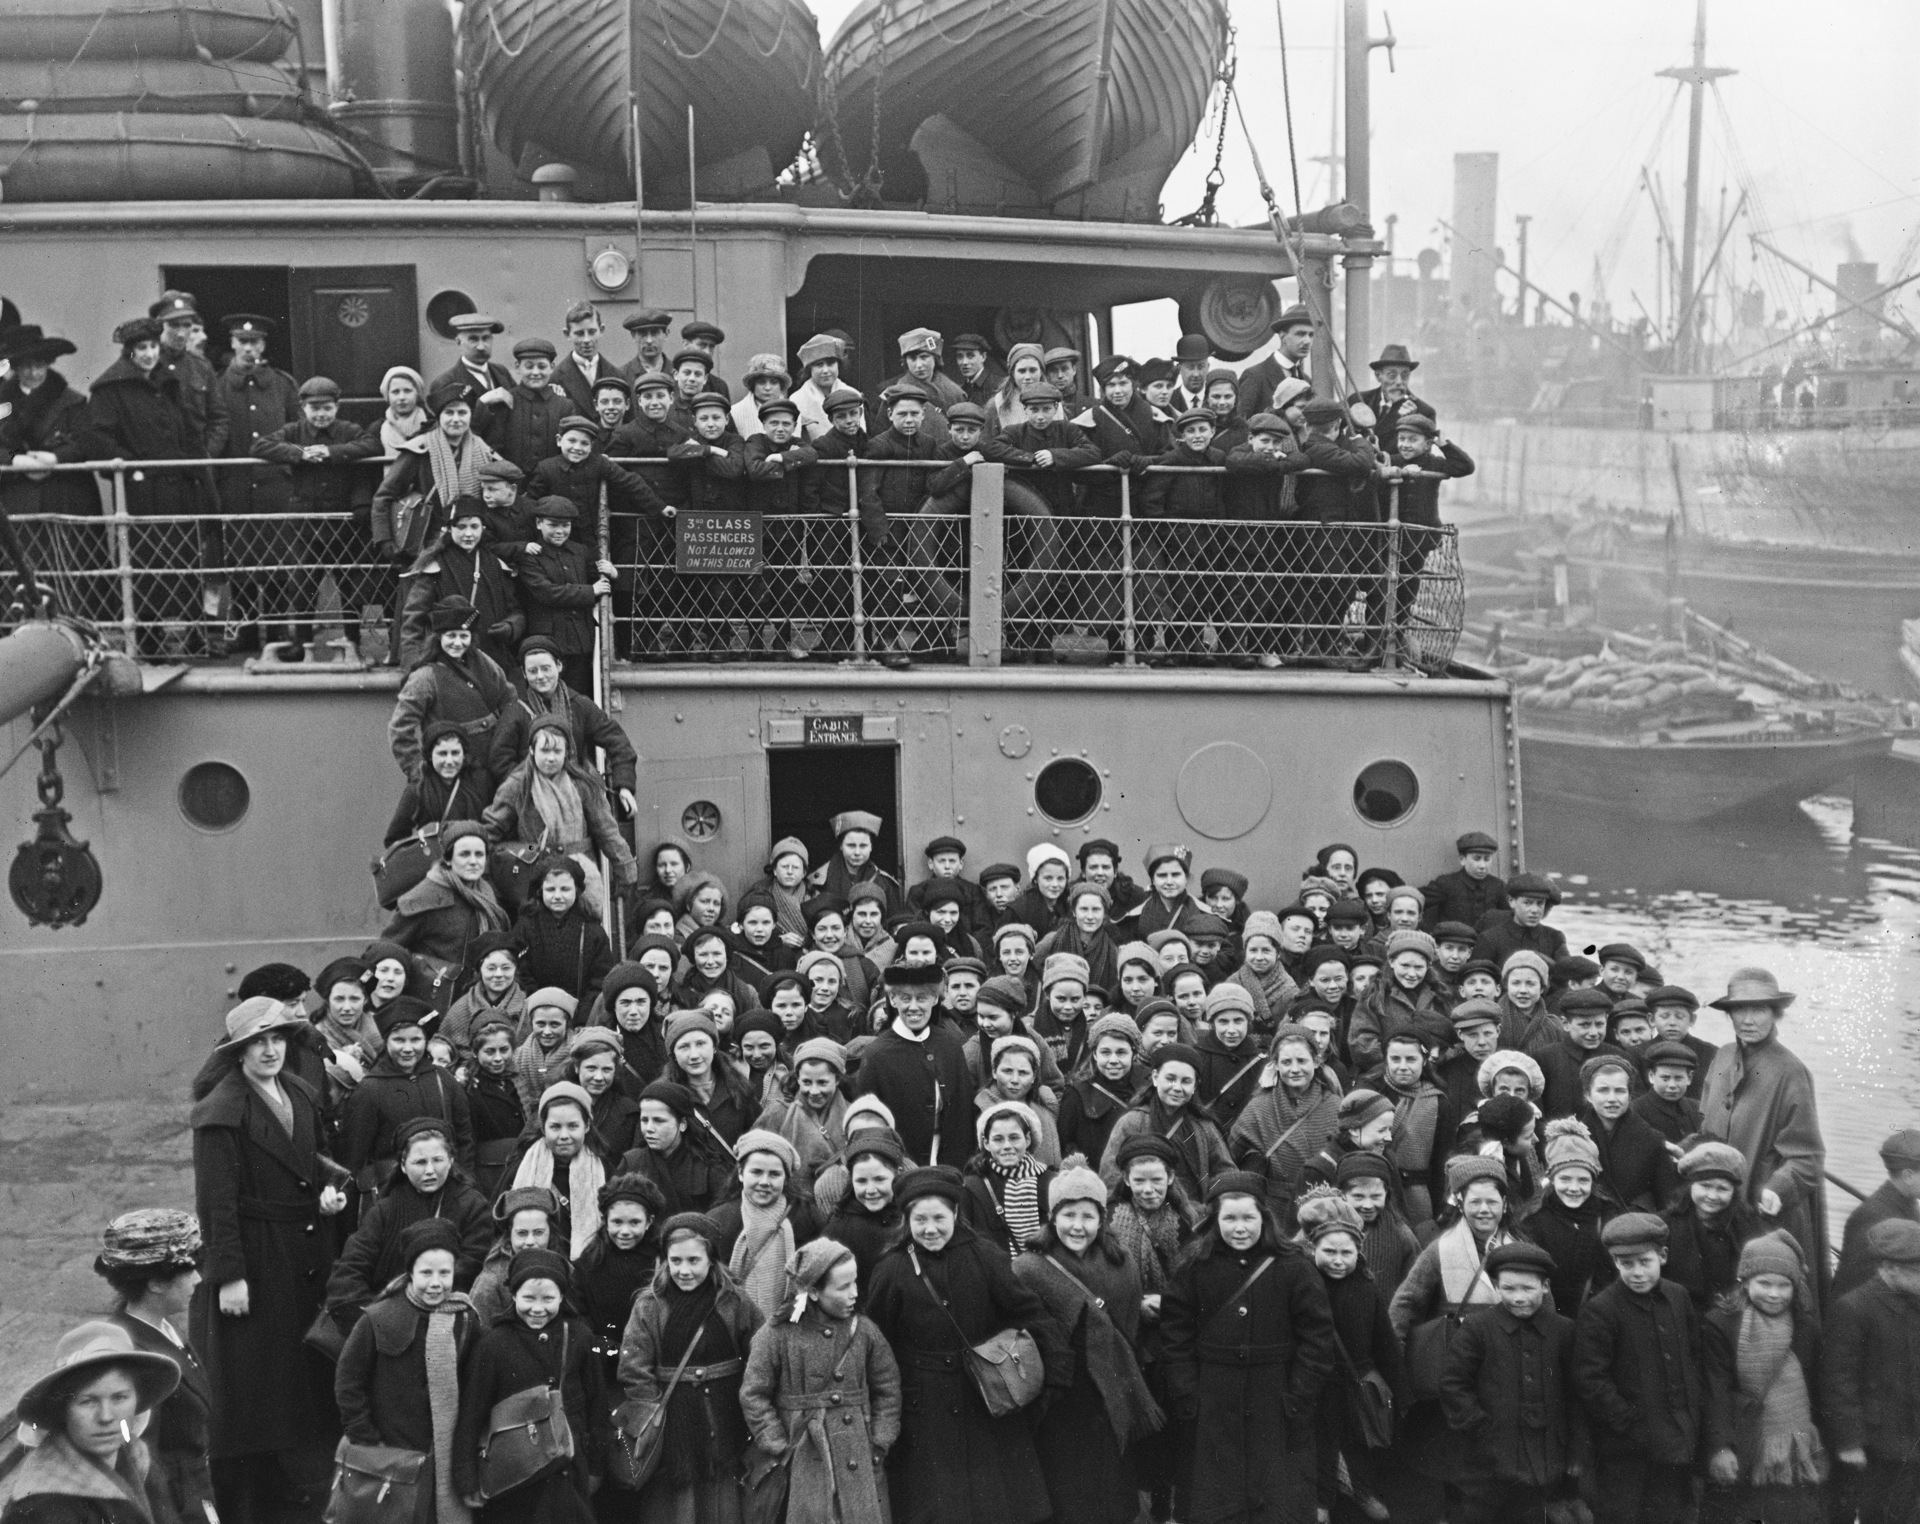 Children from Barnardo's homes for orphaned or destitute children, on board the SS Sicilian at Surrey Commercial Docks, London, before emigrating to Canada, March 11, 1920. They are the first party of Barnardo children to leave for Canada after World War I.